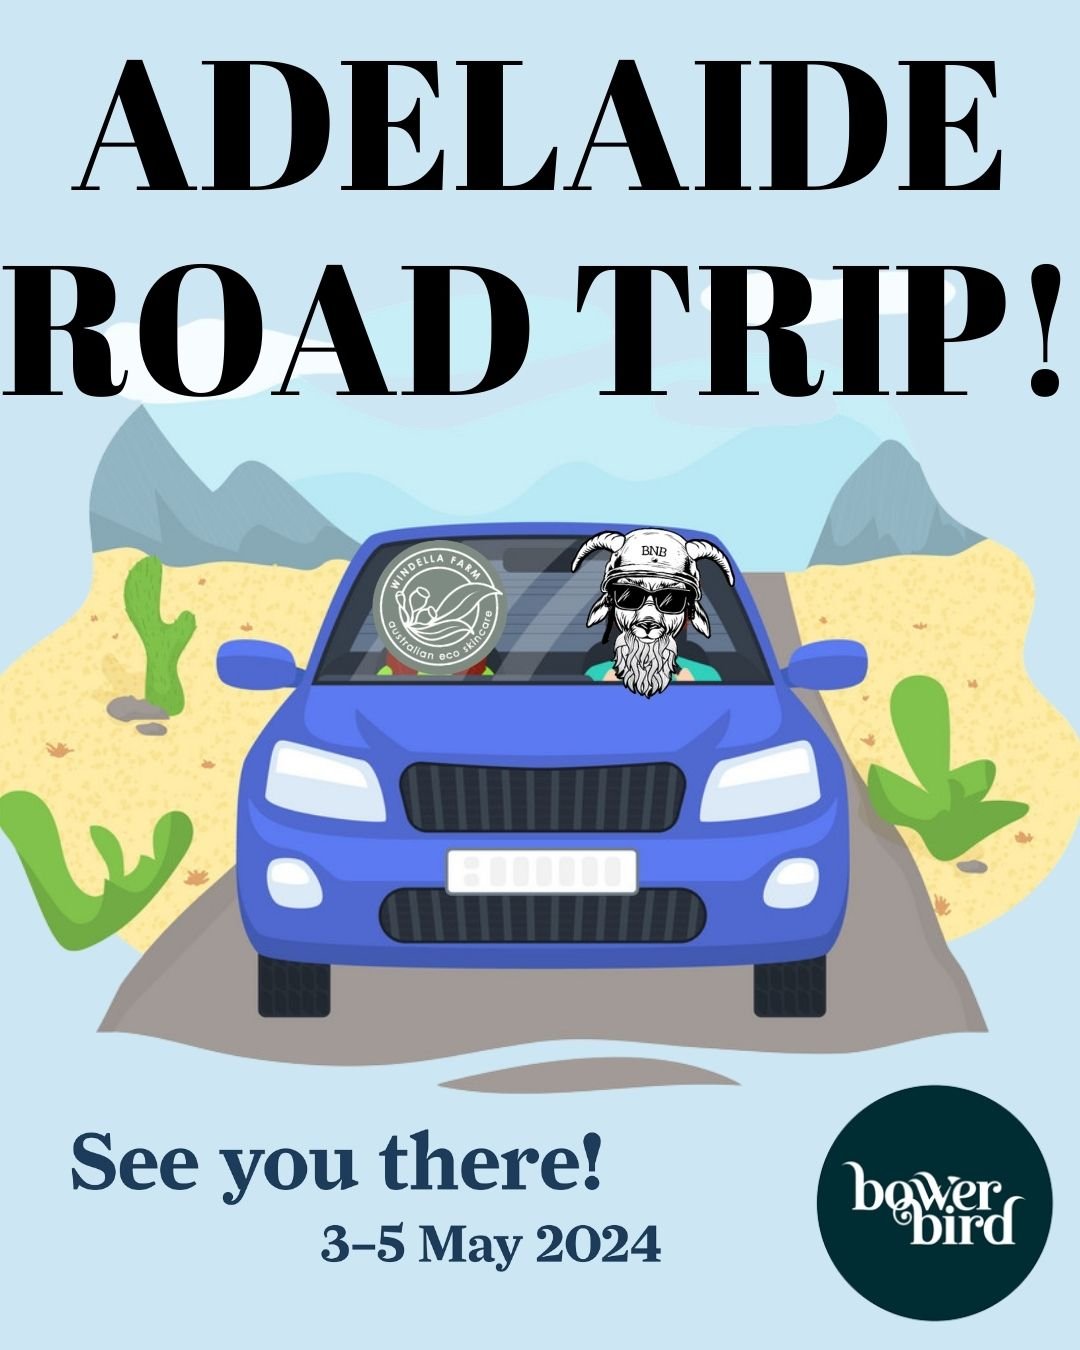 Adelaide, we are about to set off on our road trip to Bowerbird with Windella Farm Come along and say Gday, we are looking forward to seeing you all.